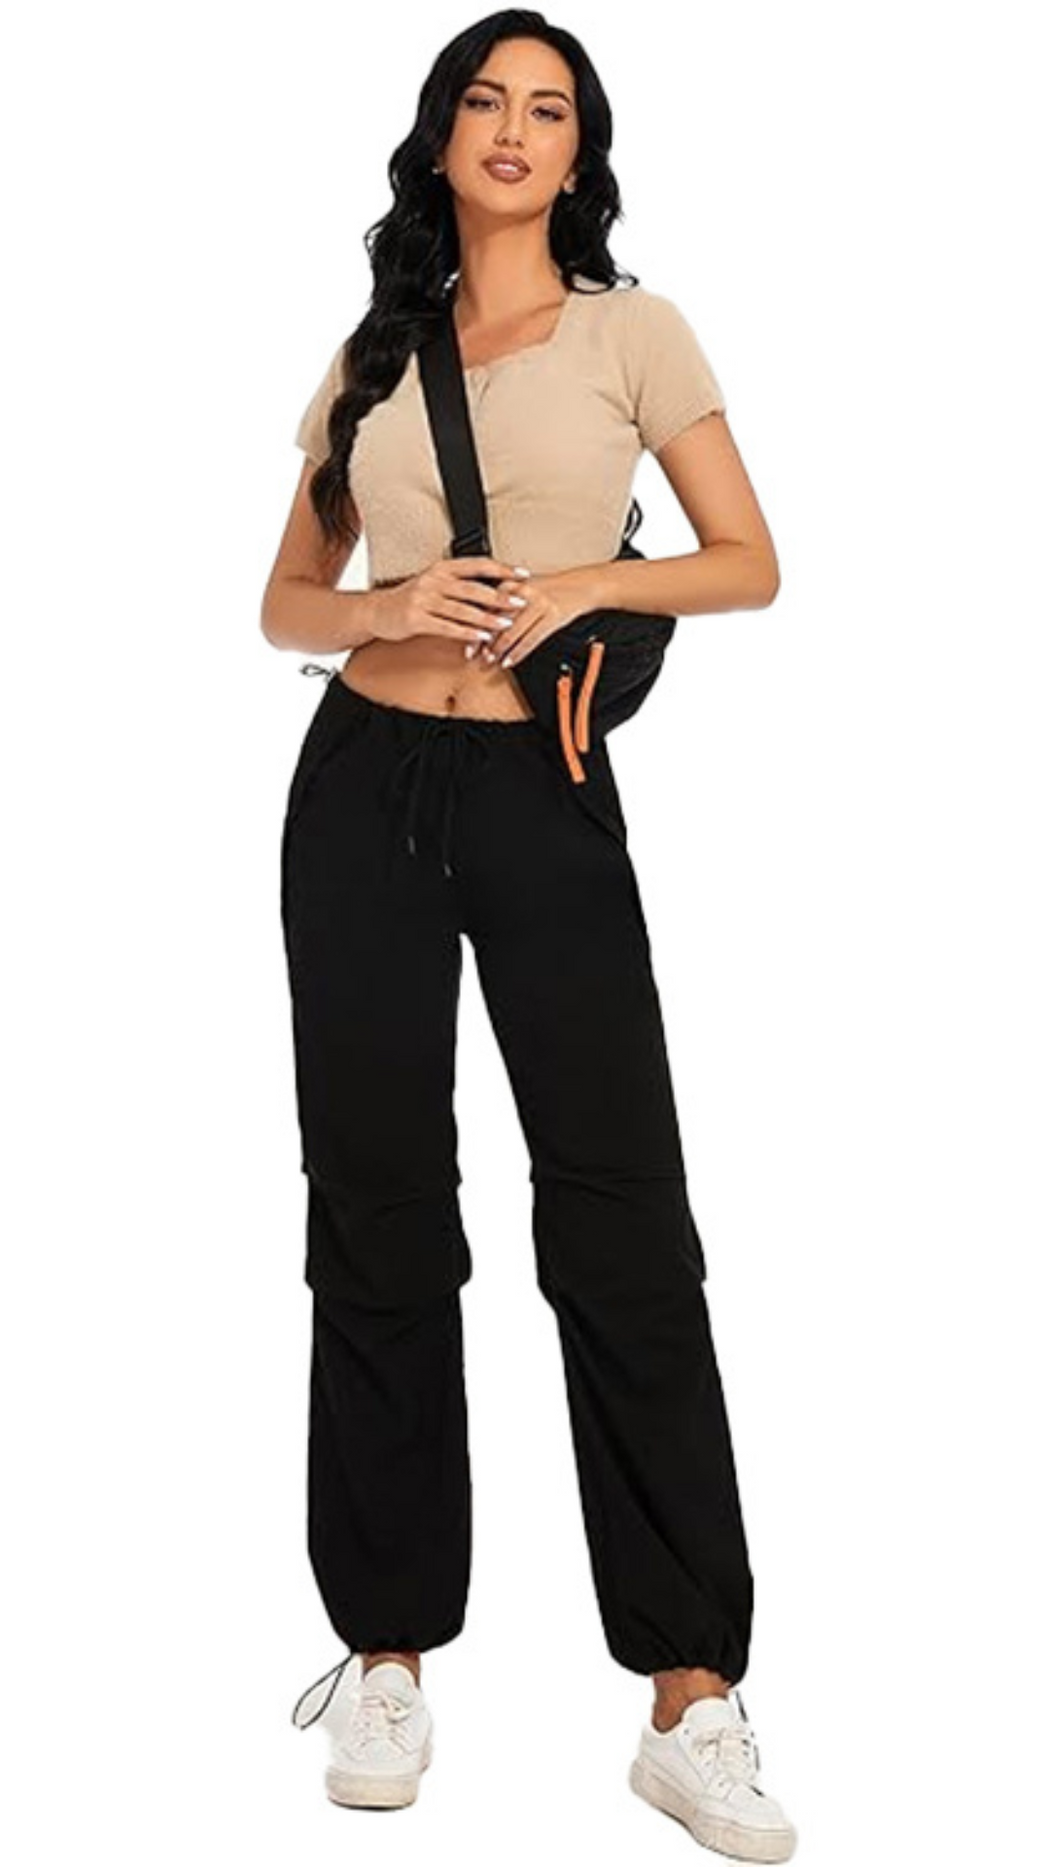 High Waist Adjustable Ruched Cargo Pants